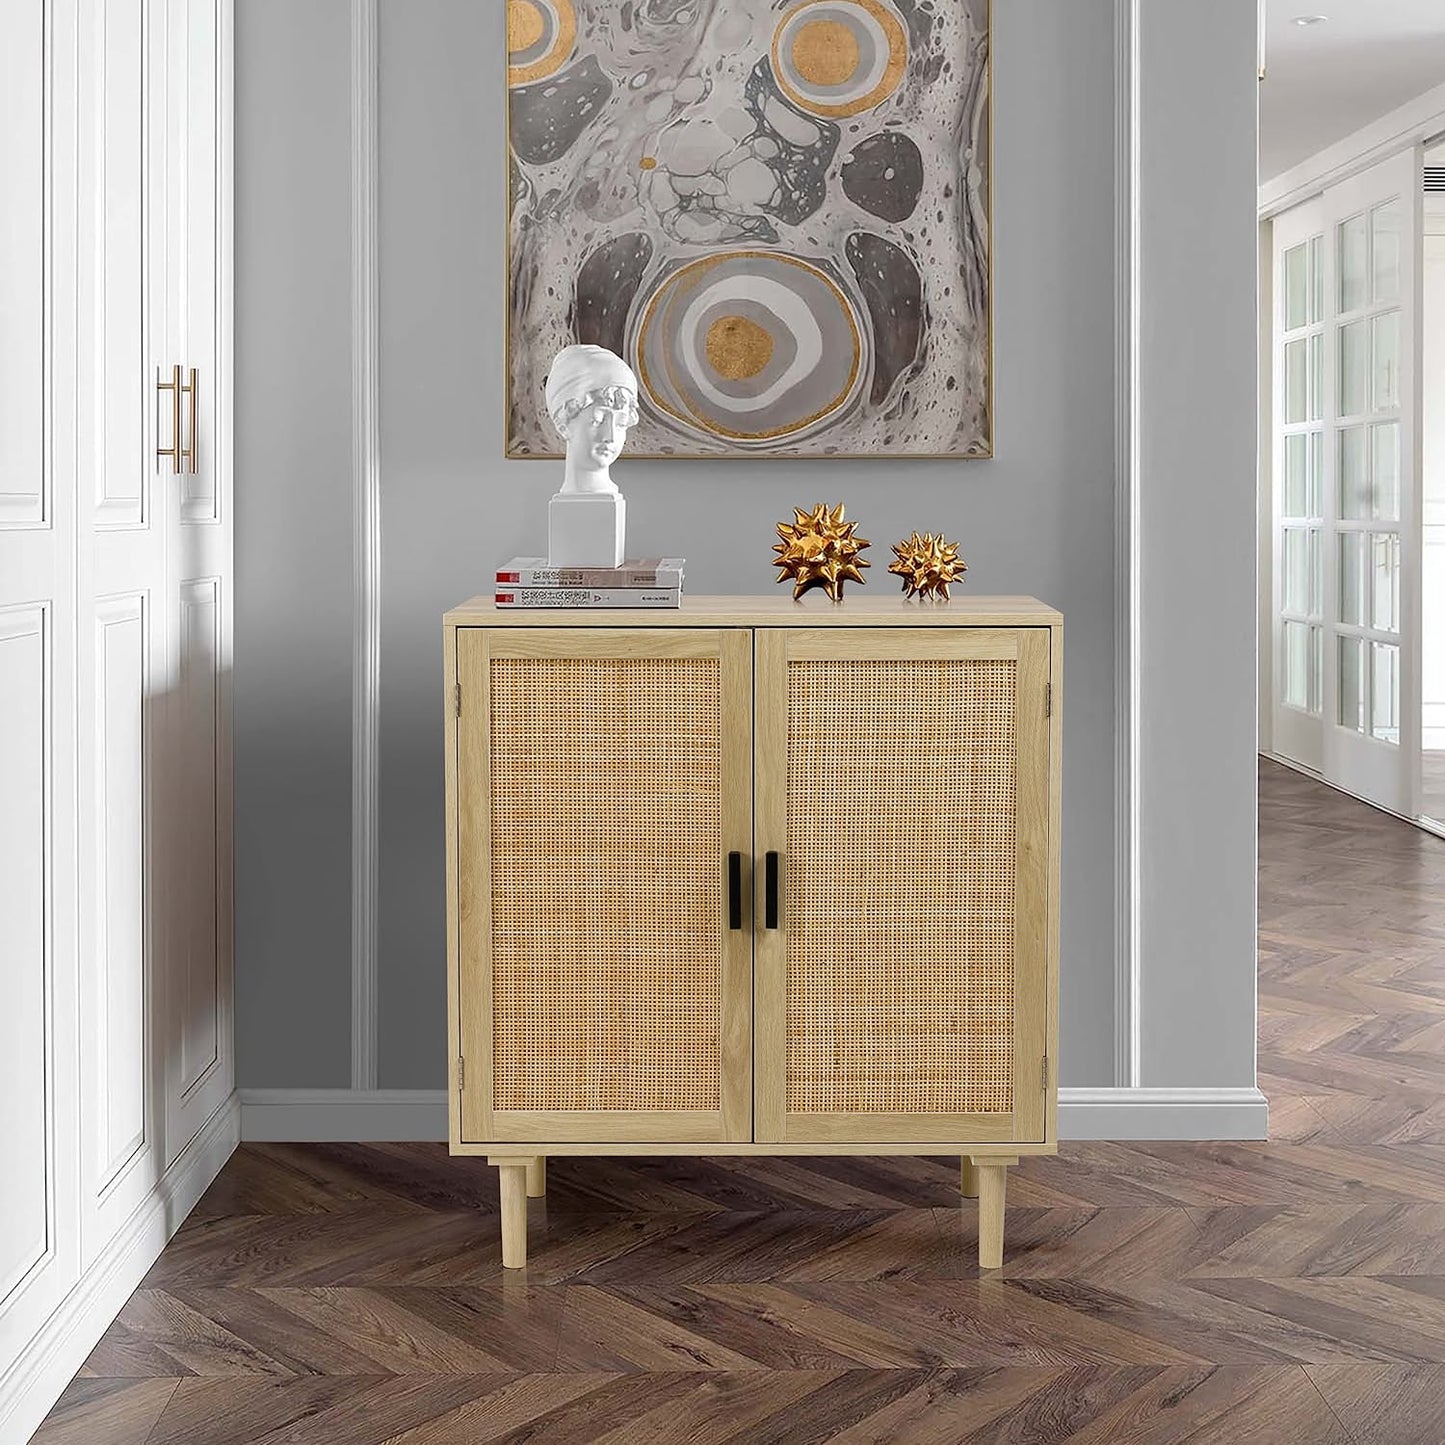 Sideboard Buffet Cabinet with Rattan Decorated Doors